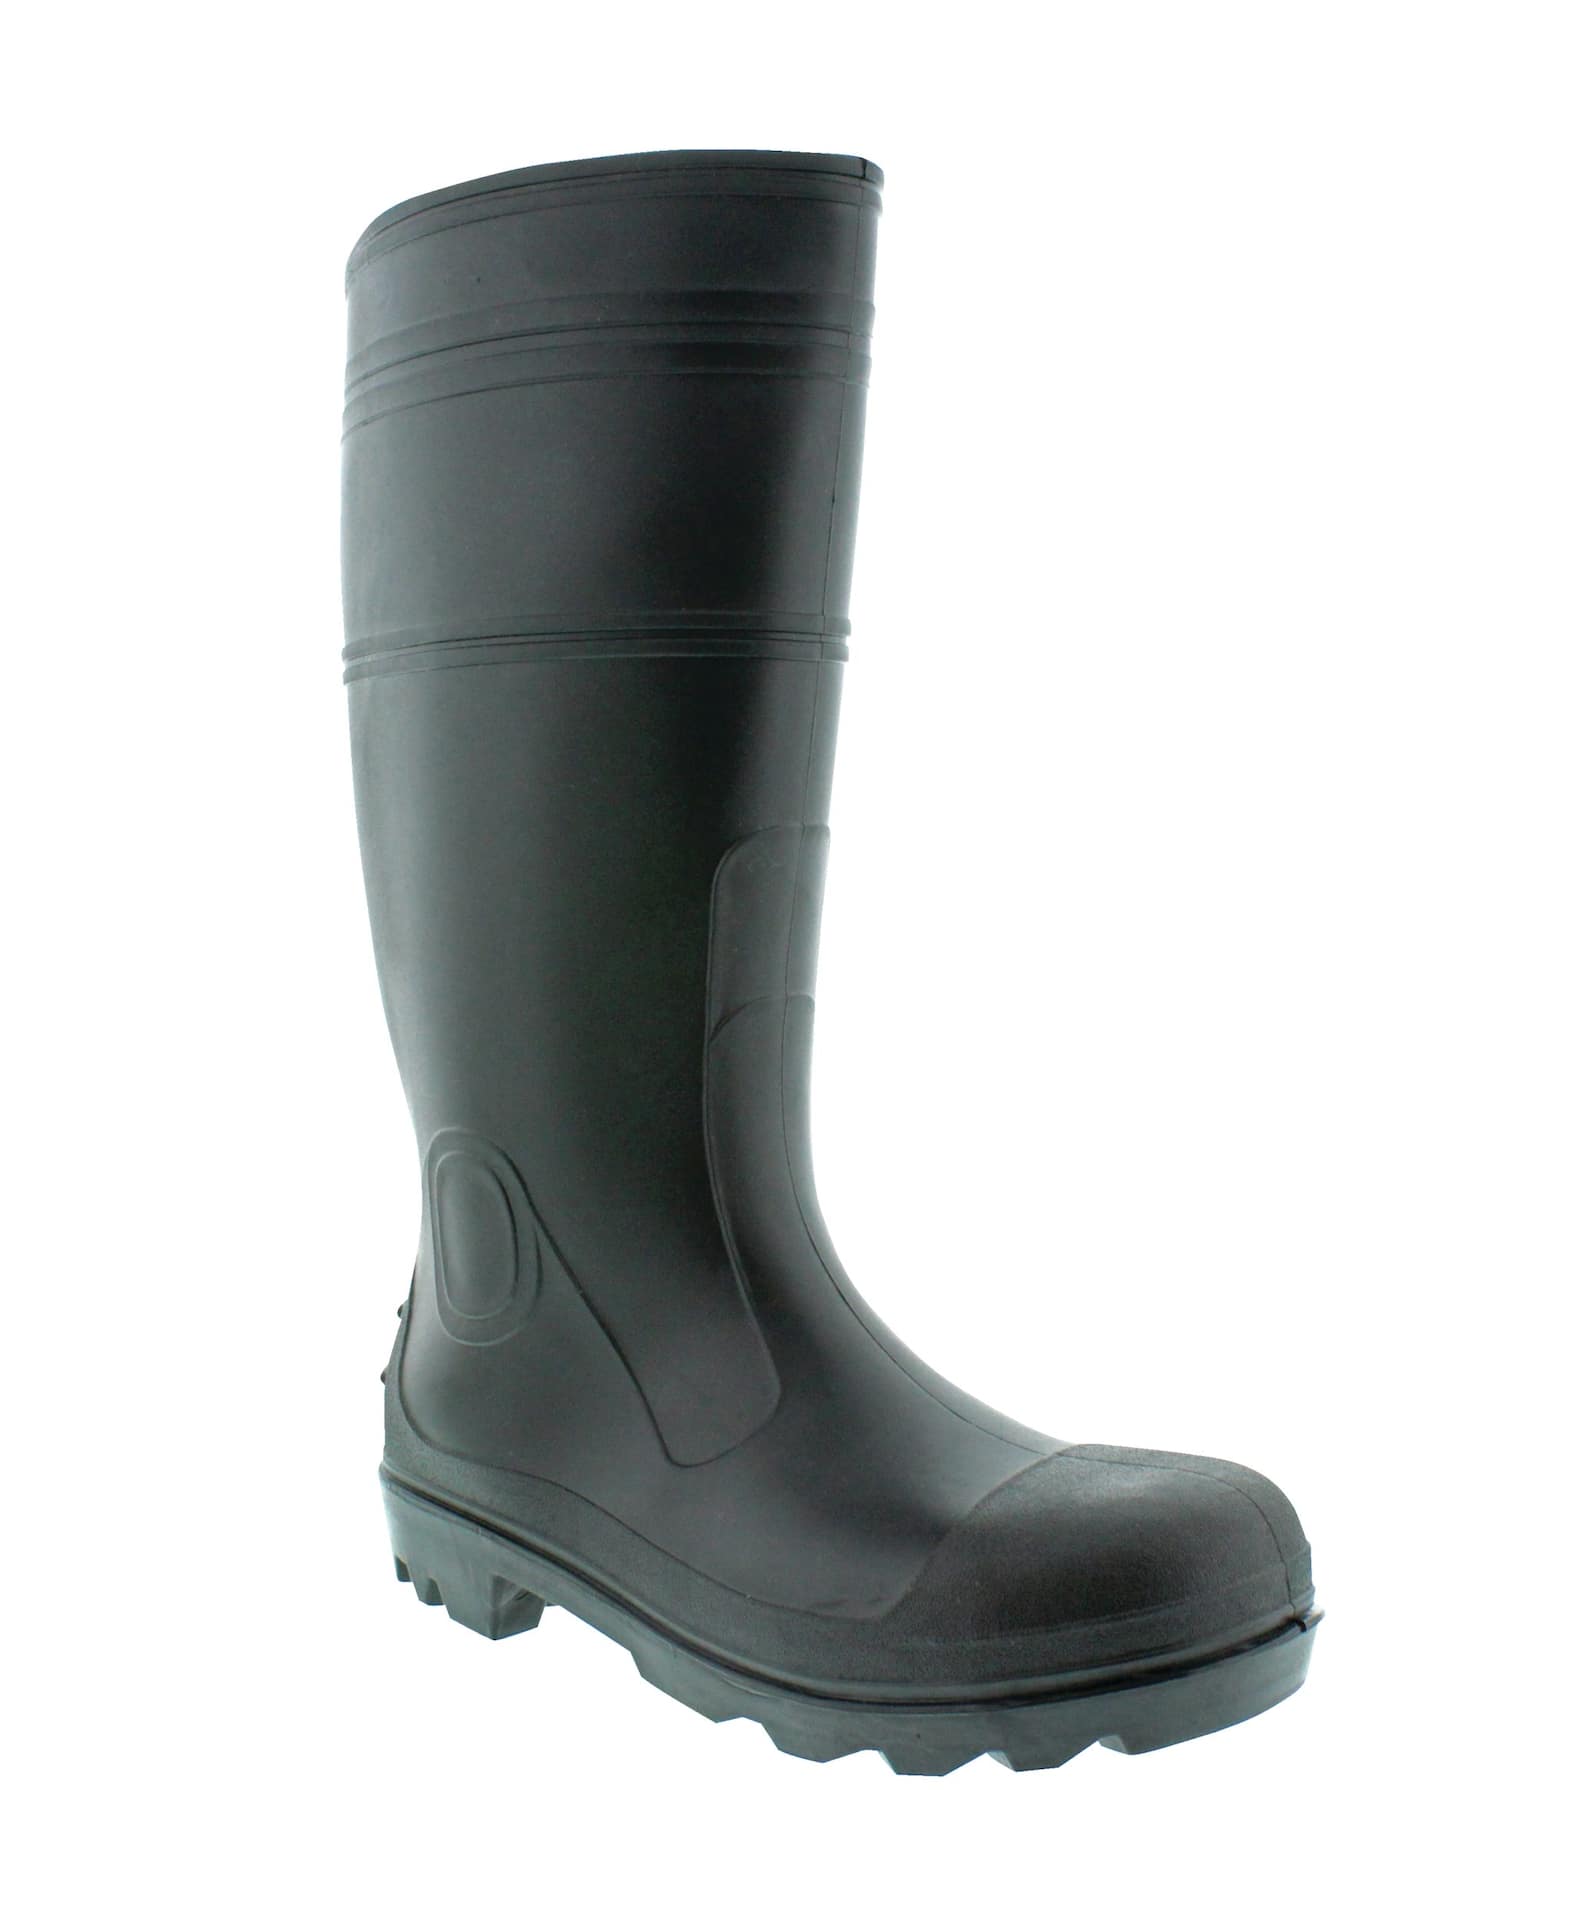 Outbound Men's Waterproof Rain Boots with Cushioned Insole